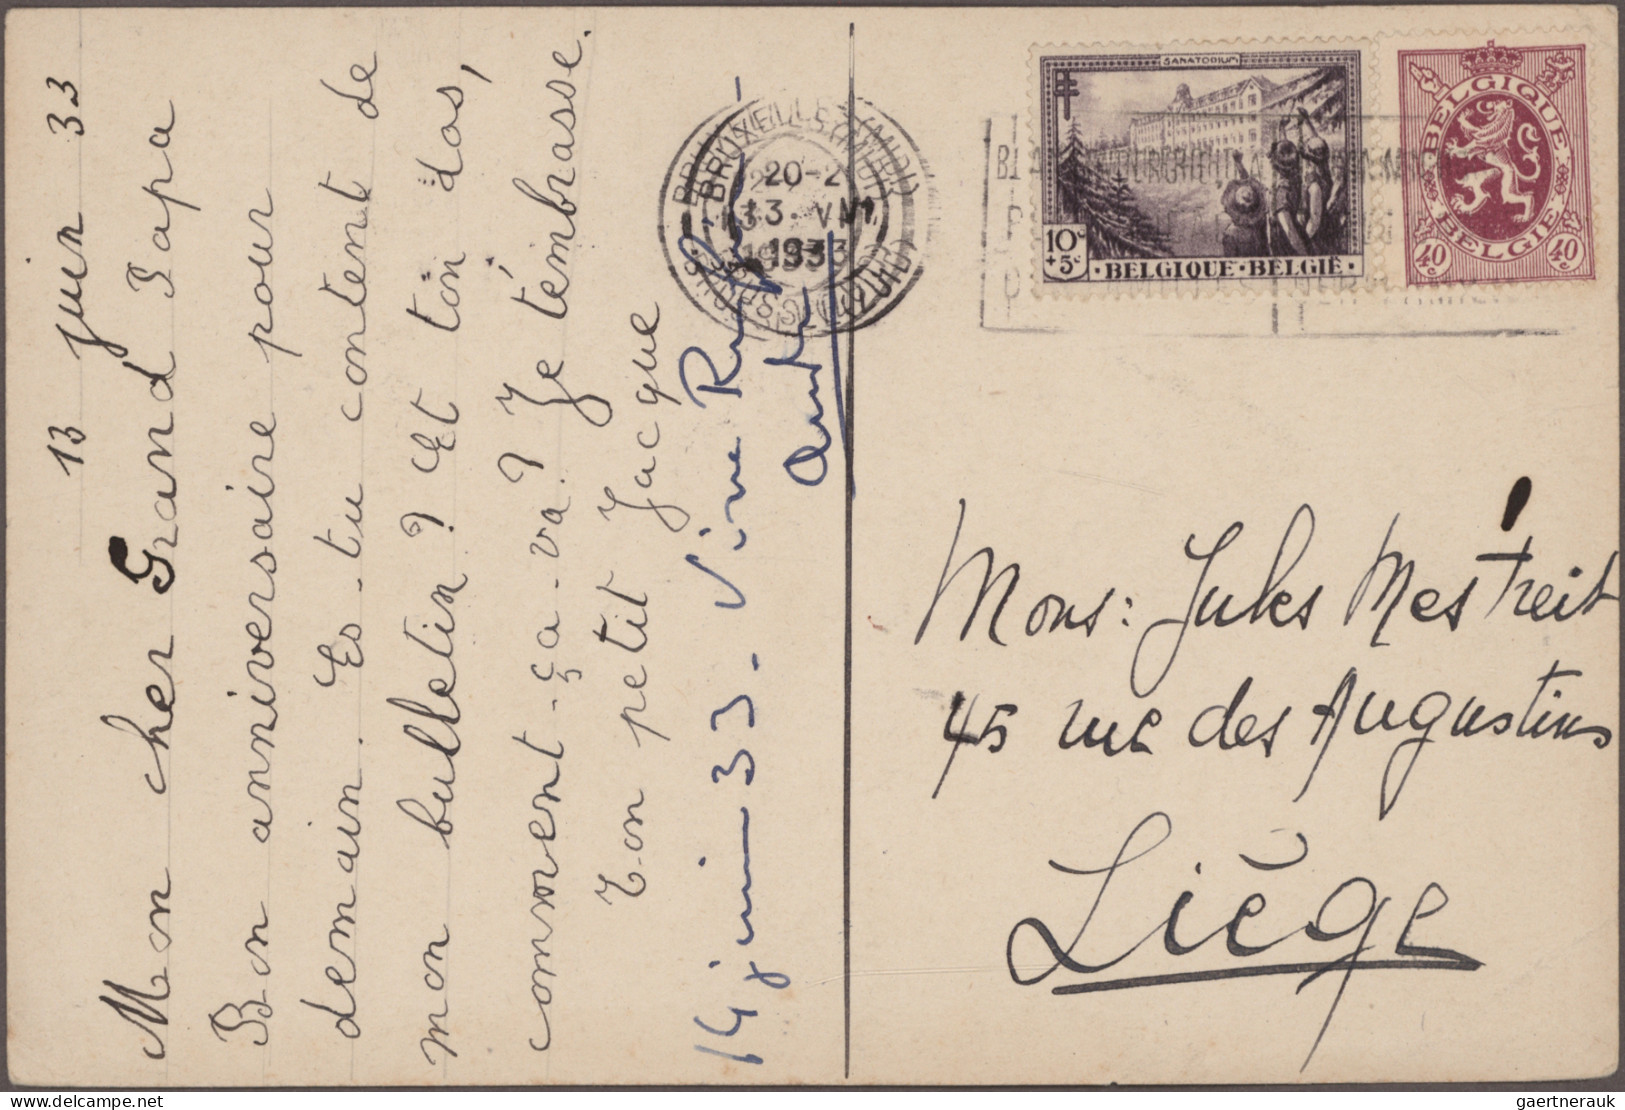 Europe: 1890/1980 (ca.), balance of apprx. 640 covers/cards/stationeries, compri